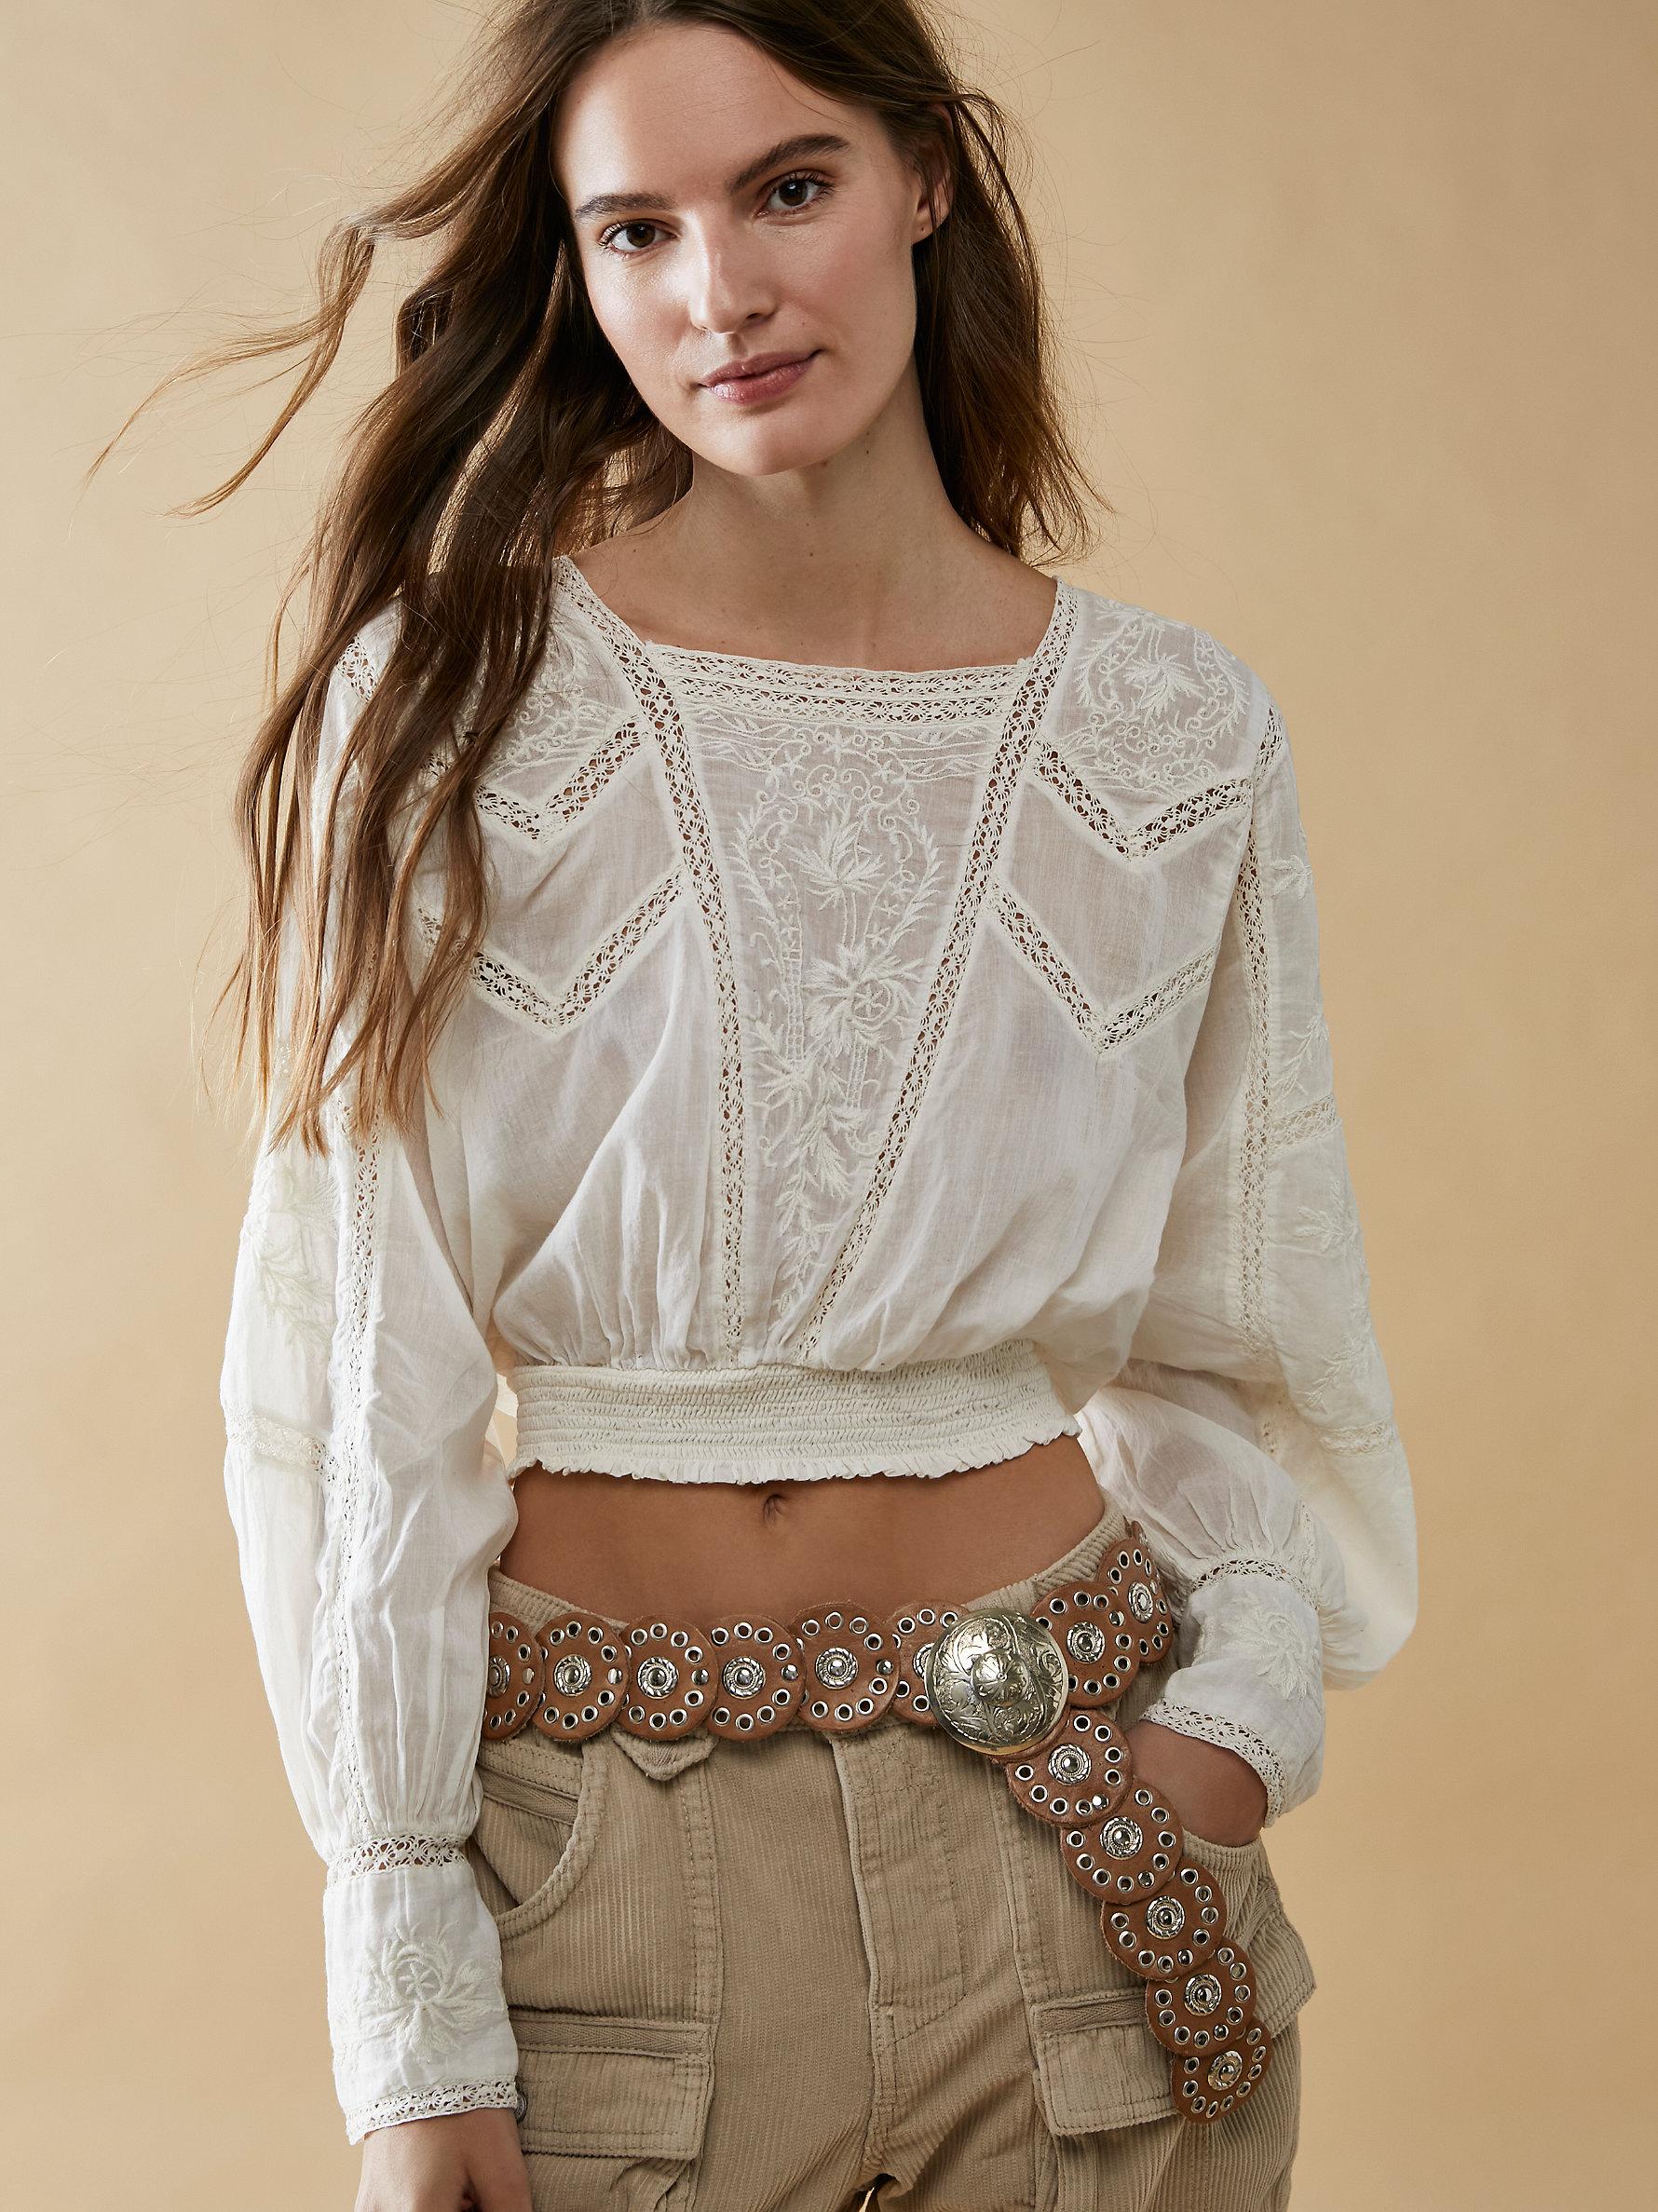 Twisted Tilståelse indhente Free People Lucky Me Lace Top in Natural | Lyst